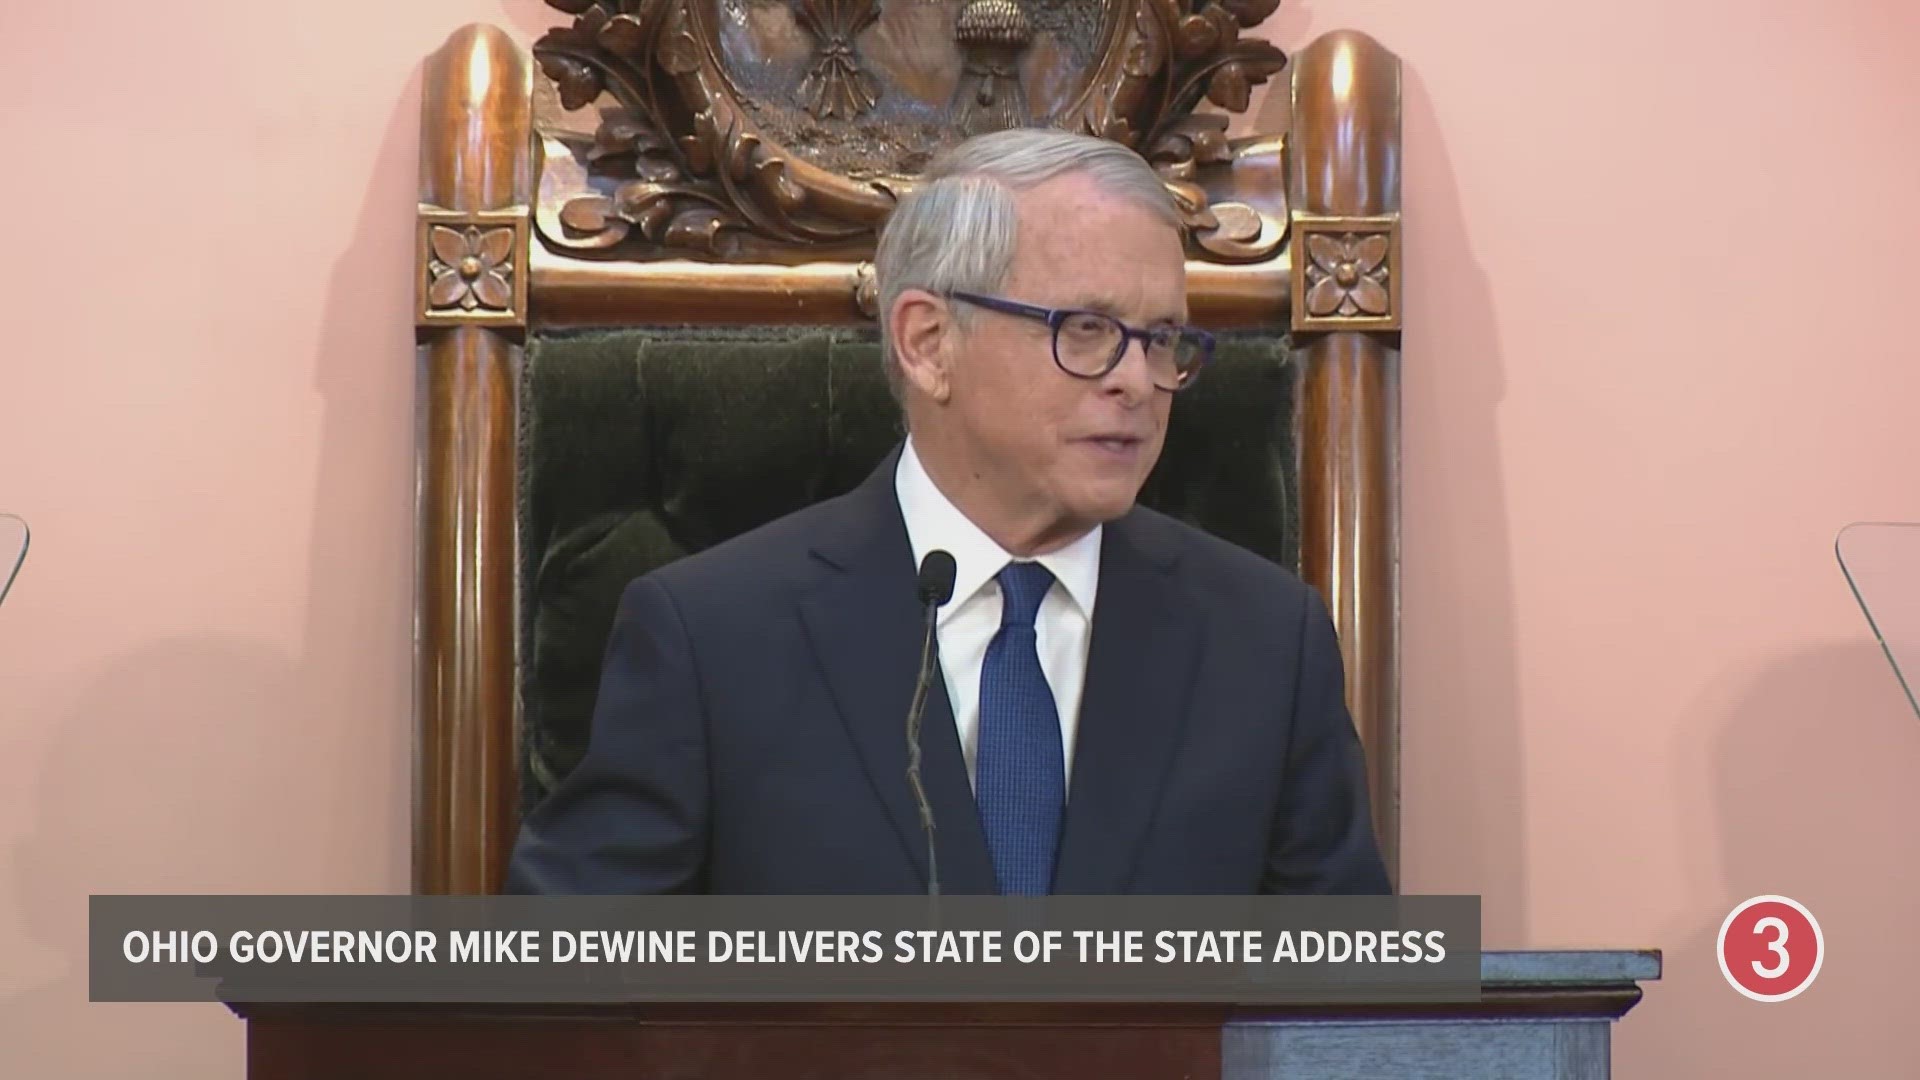 DeWine shouted out some of the state's top accomplishments in response to a recent statement by Pennsylvania Gov. Josh Shapiro.